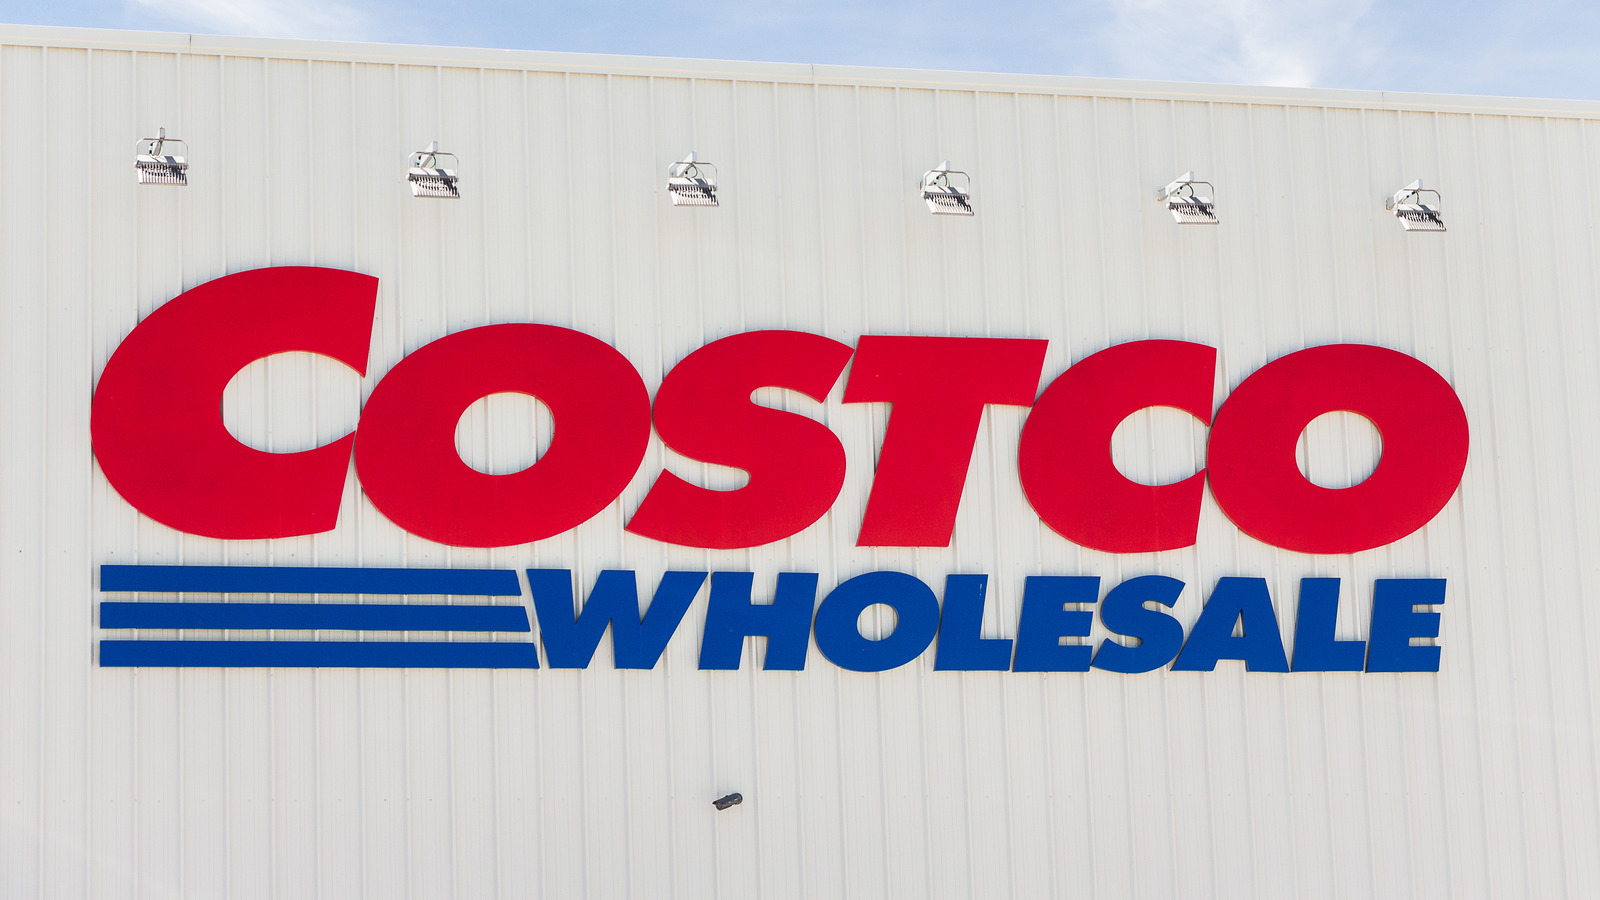 1. "Costco Reddit" - A subreddit dedicated to discussing all things Costco, including discounts and deals - wide 1